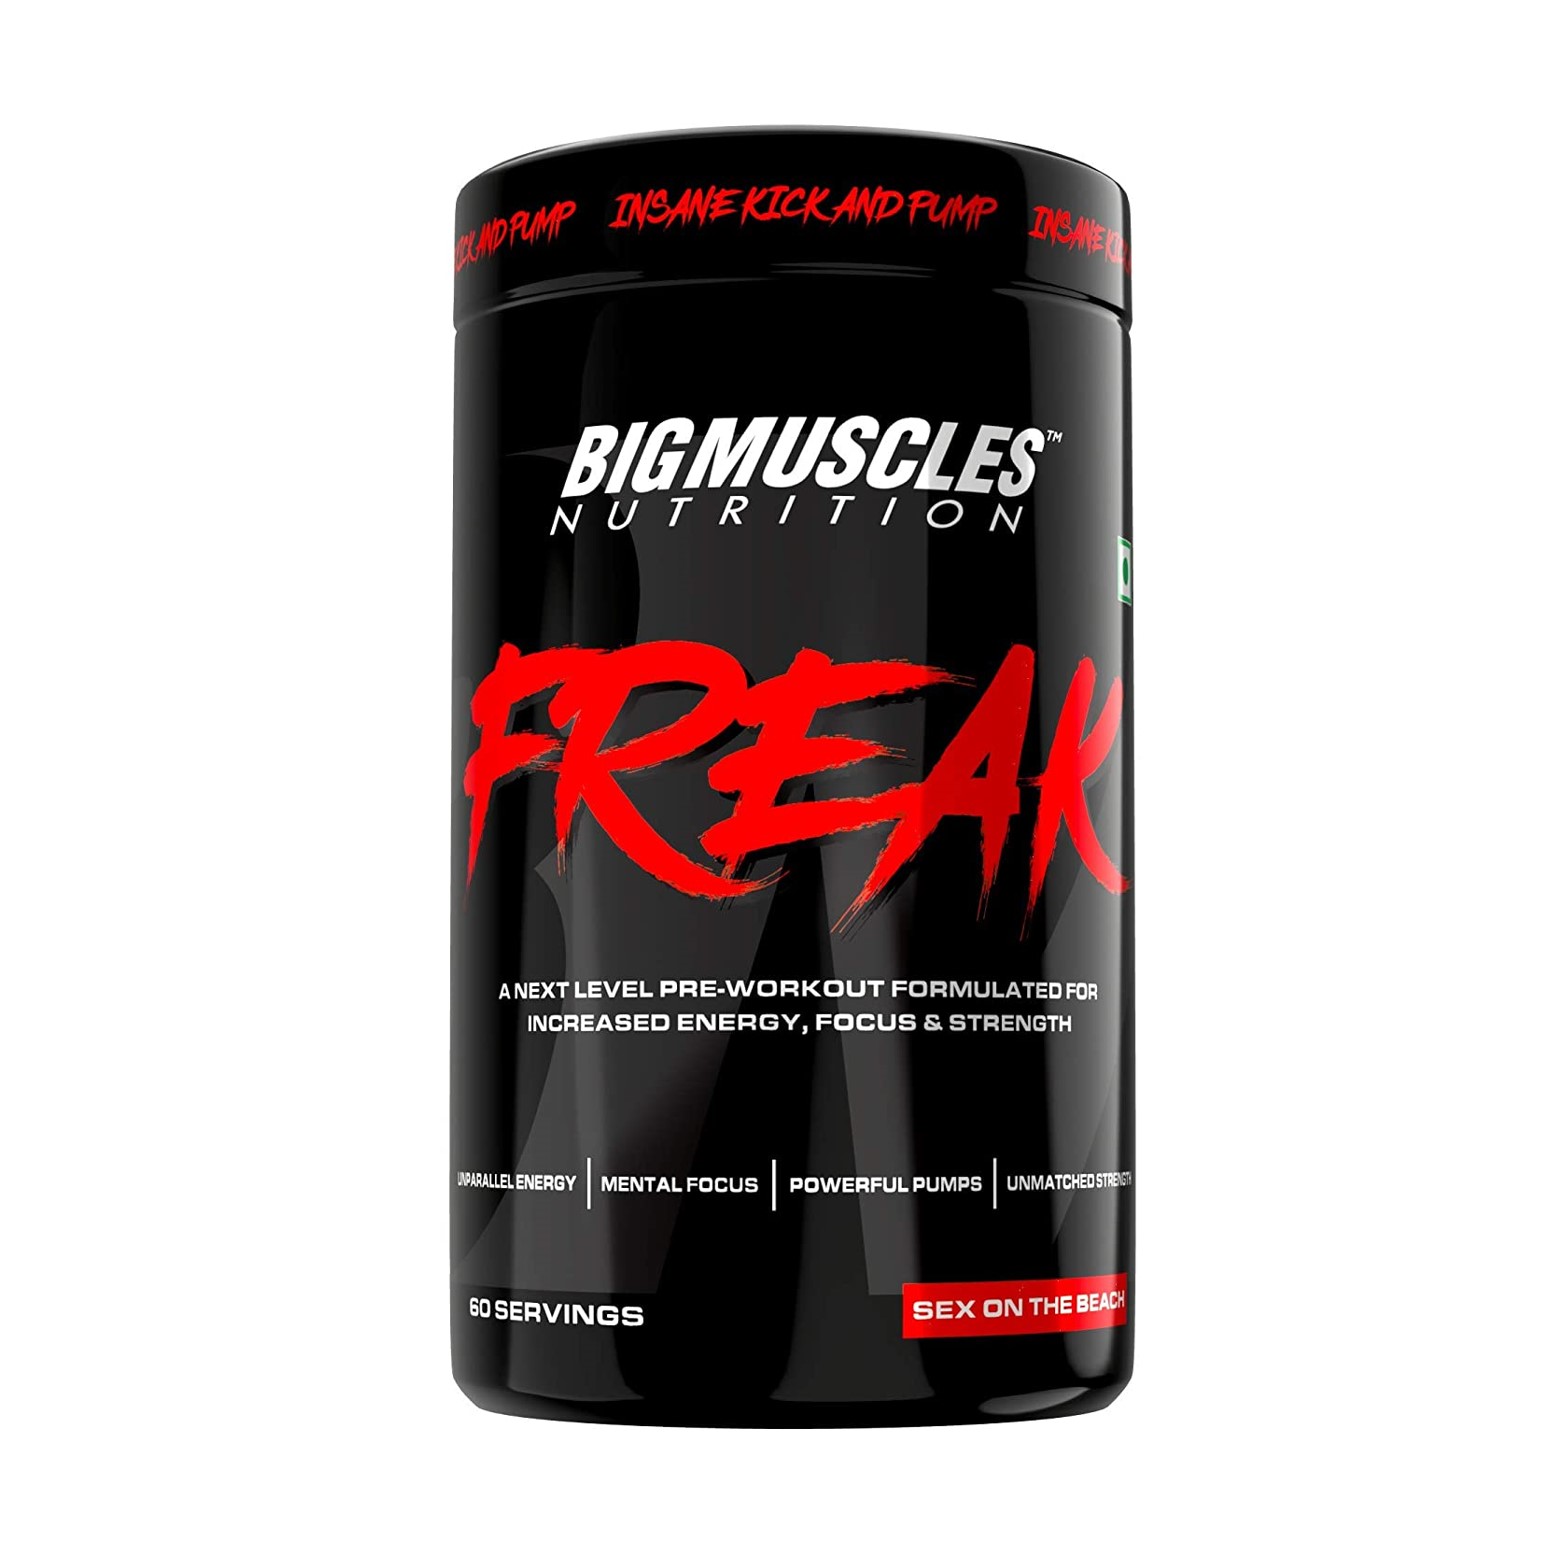 Bigmuscles Nutrition Freak 360G,60 Serving (Sex On The Beach)